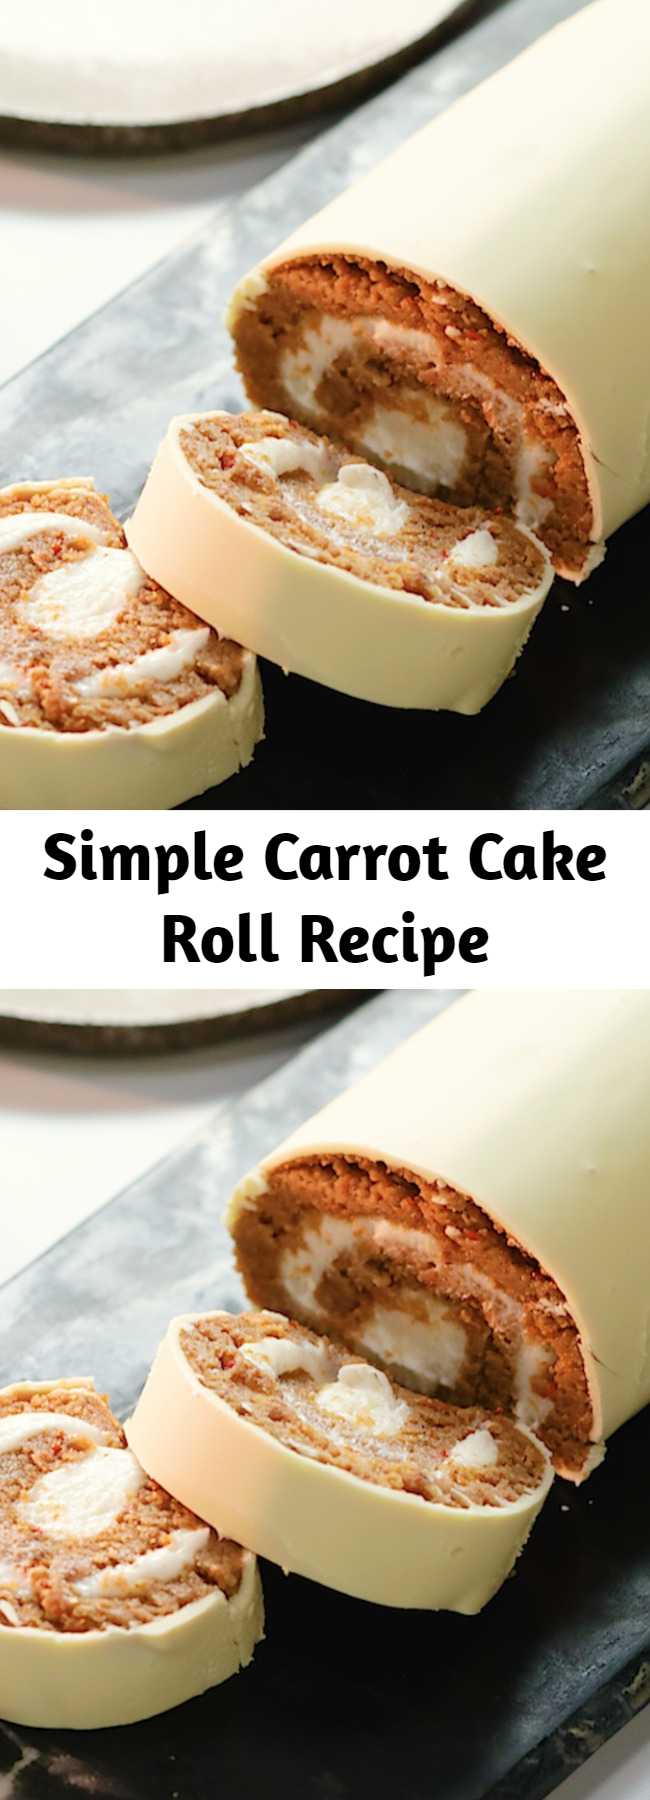 Simple Carrot Cake Roll Recipe - All the flavours of a classic carrot cake (quite literally) rolled into one! Our simple and sweet carrot cake roll cake recipe will leave you and the kids wanting more after every bite.